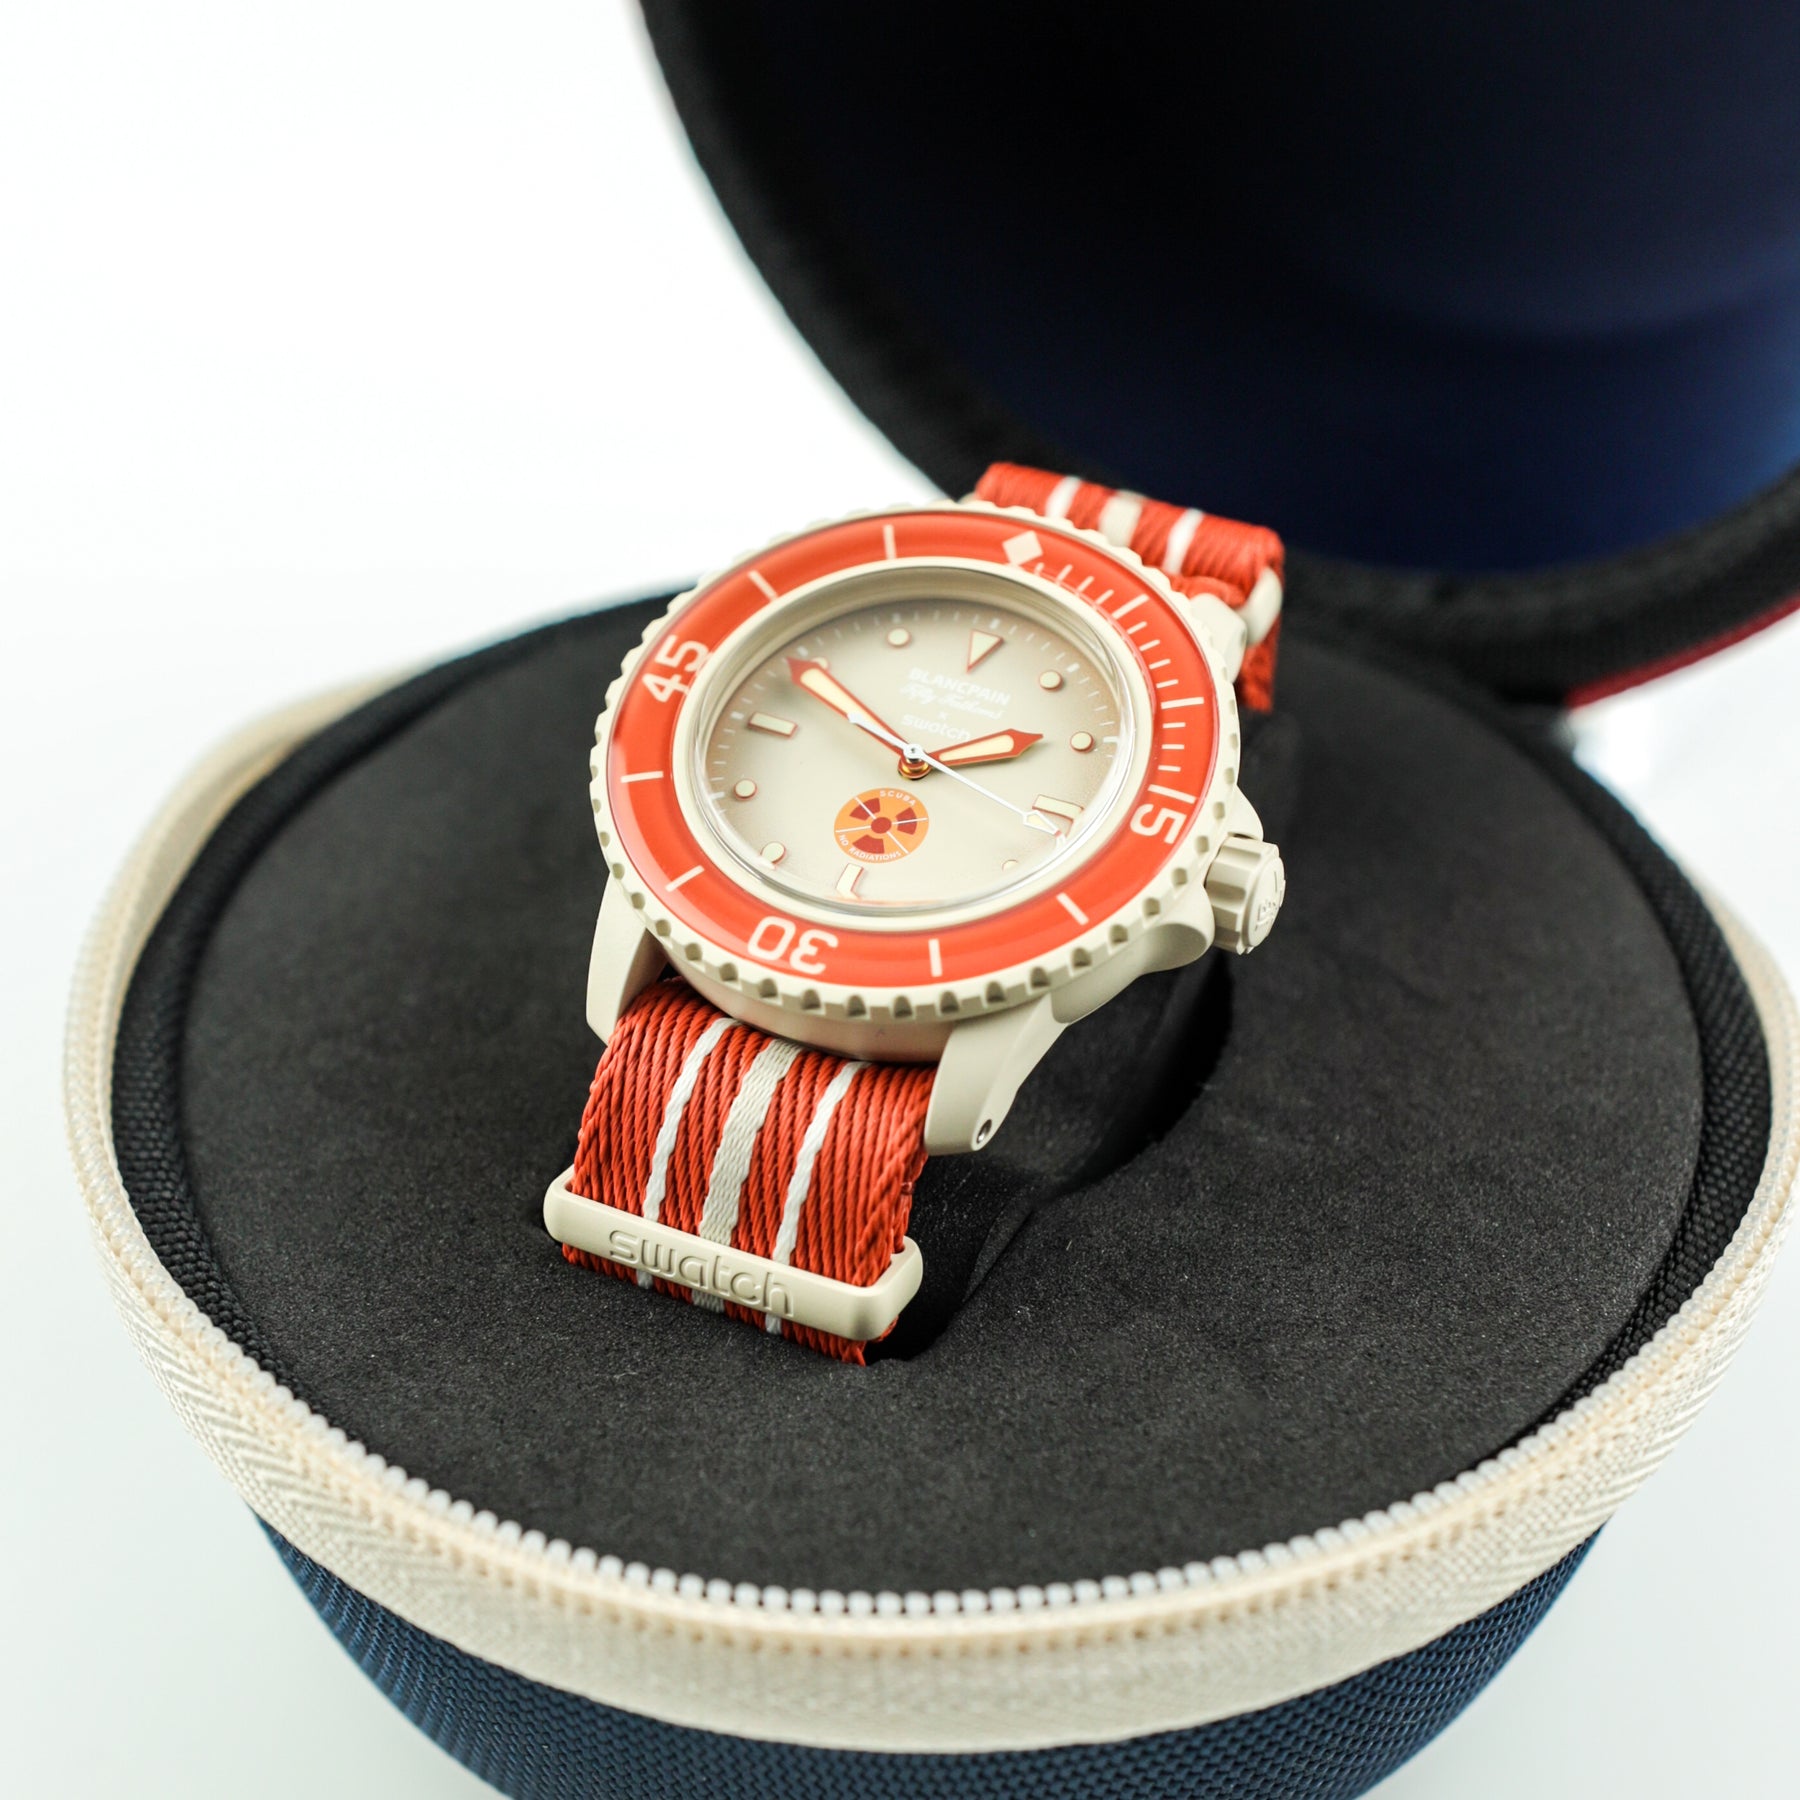 Unworn Pre - Owned Blancpain X Swatch ARCTIC OCEAN Full set with box & papers at RR JEWELLERS YARM